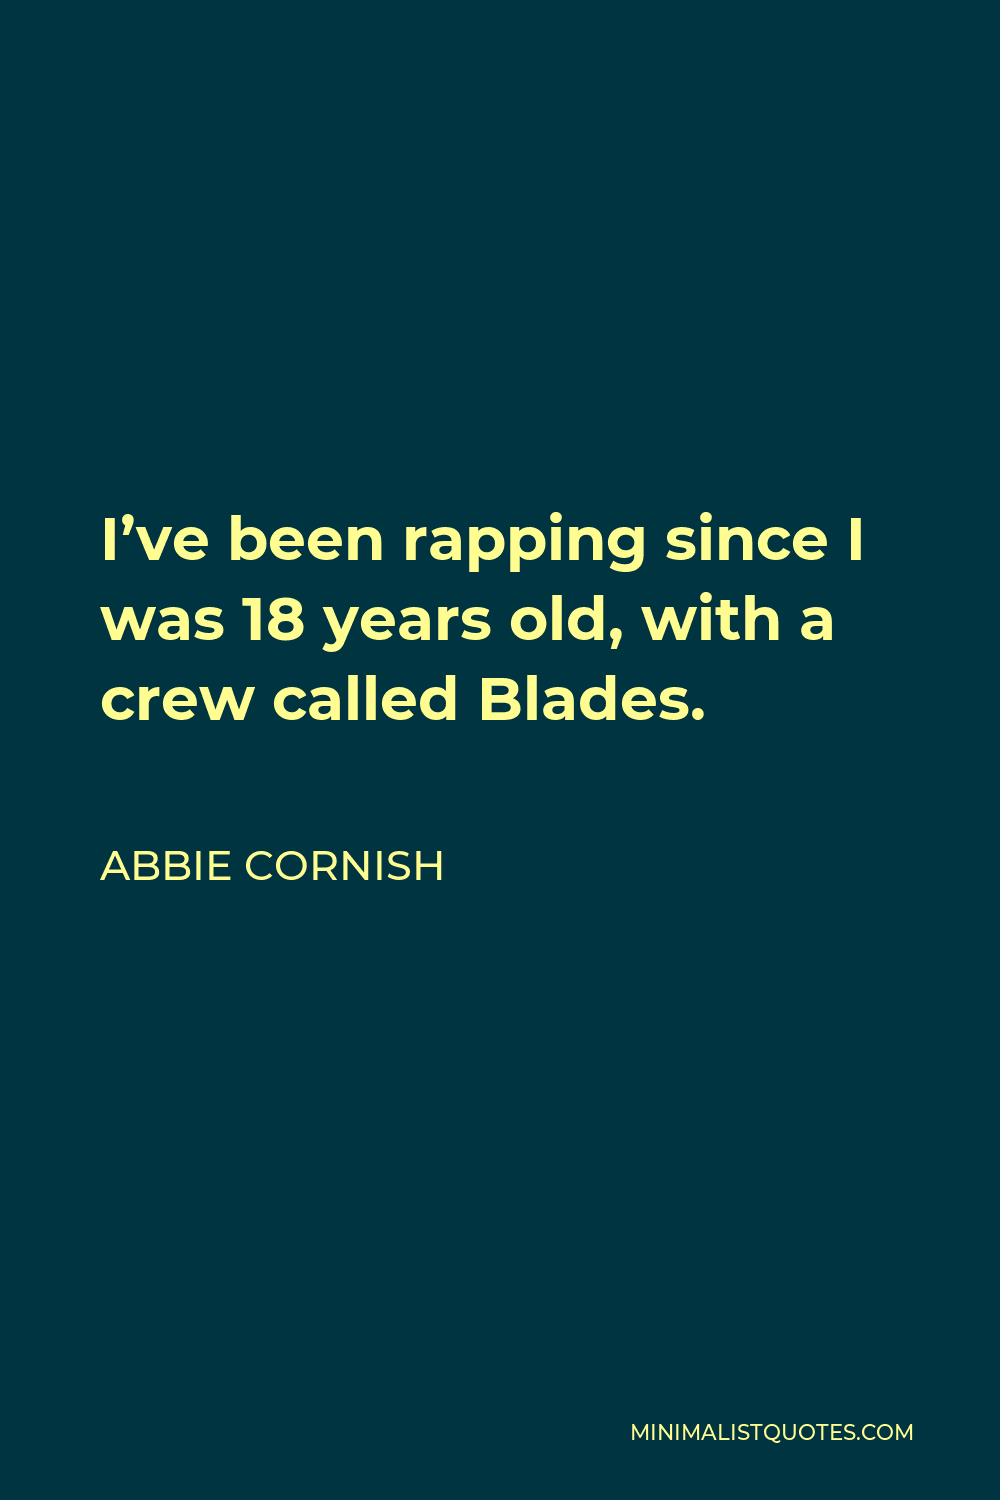 Abbie Cornish Quote - I’ve been rapping since I was 18 years old, with a crew called Blades.